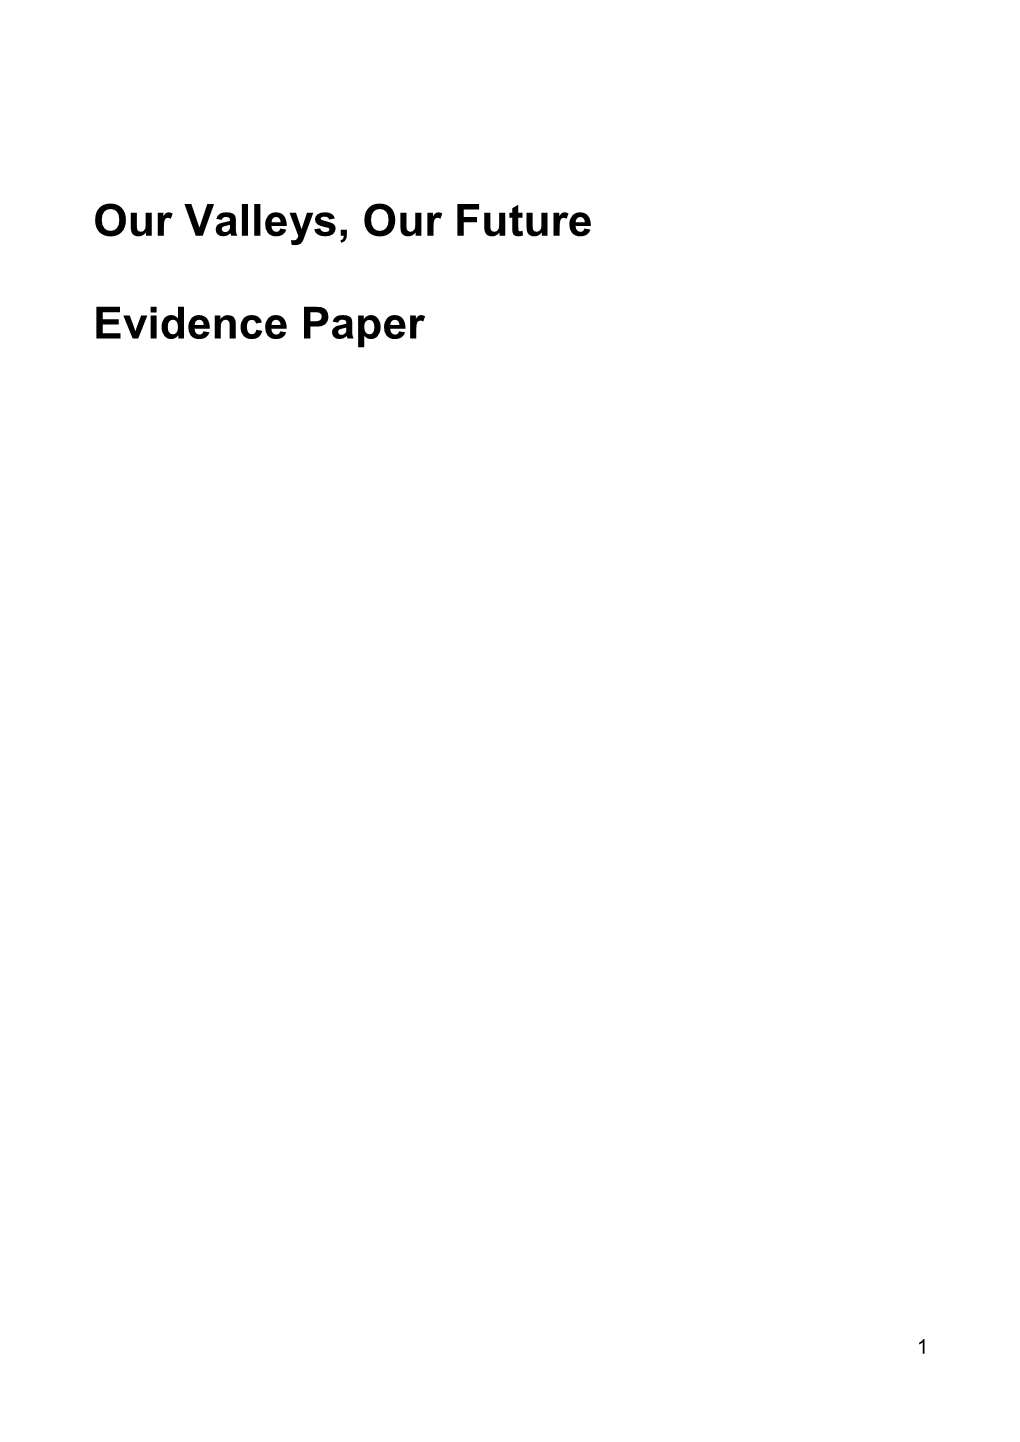 Our Valleys, Our Future Evidence Paper